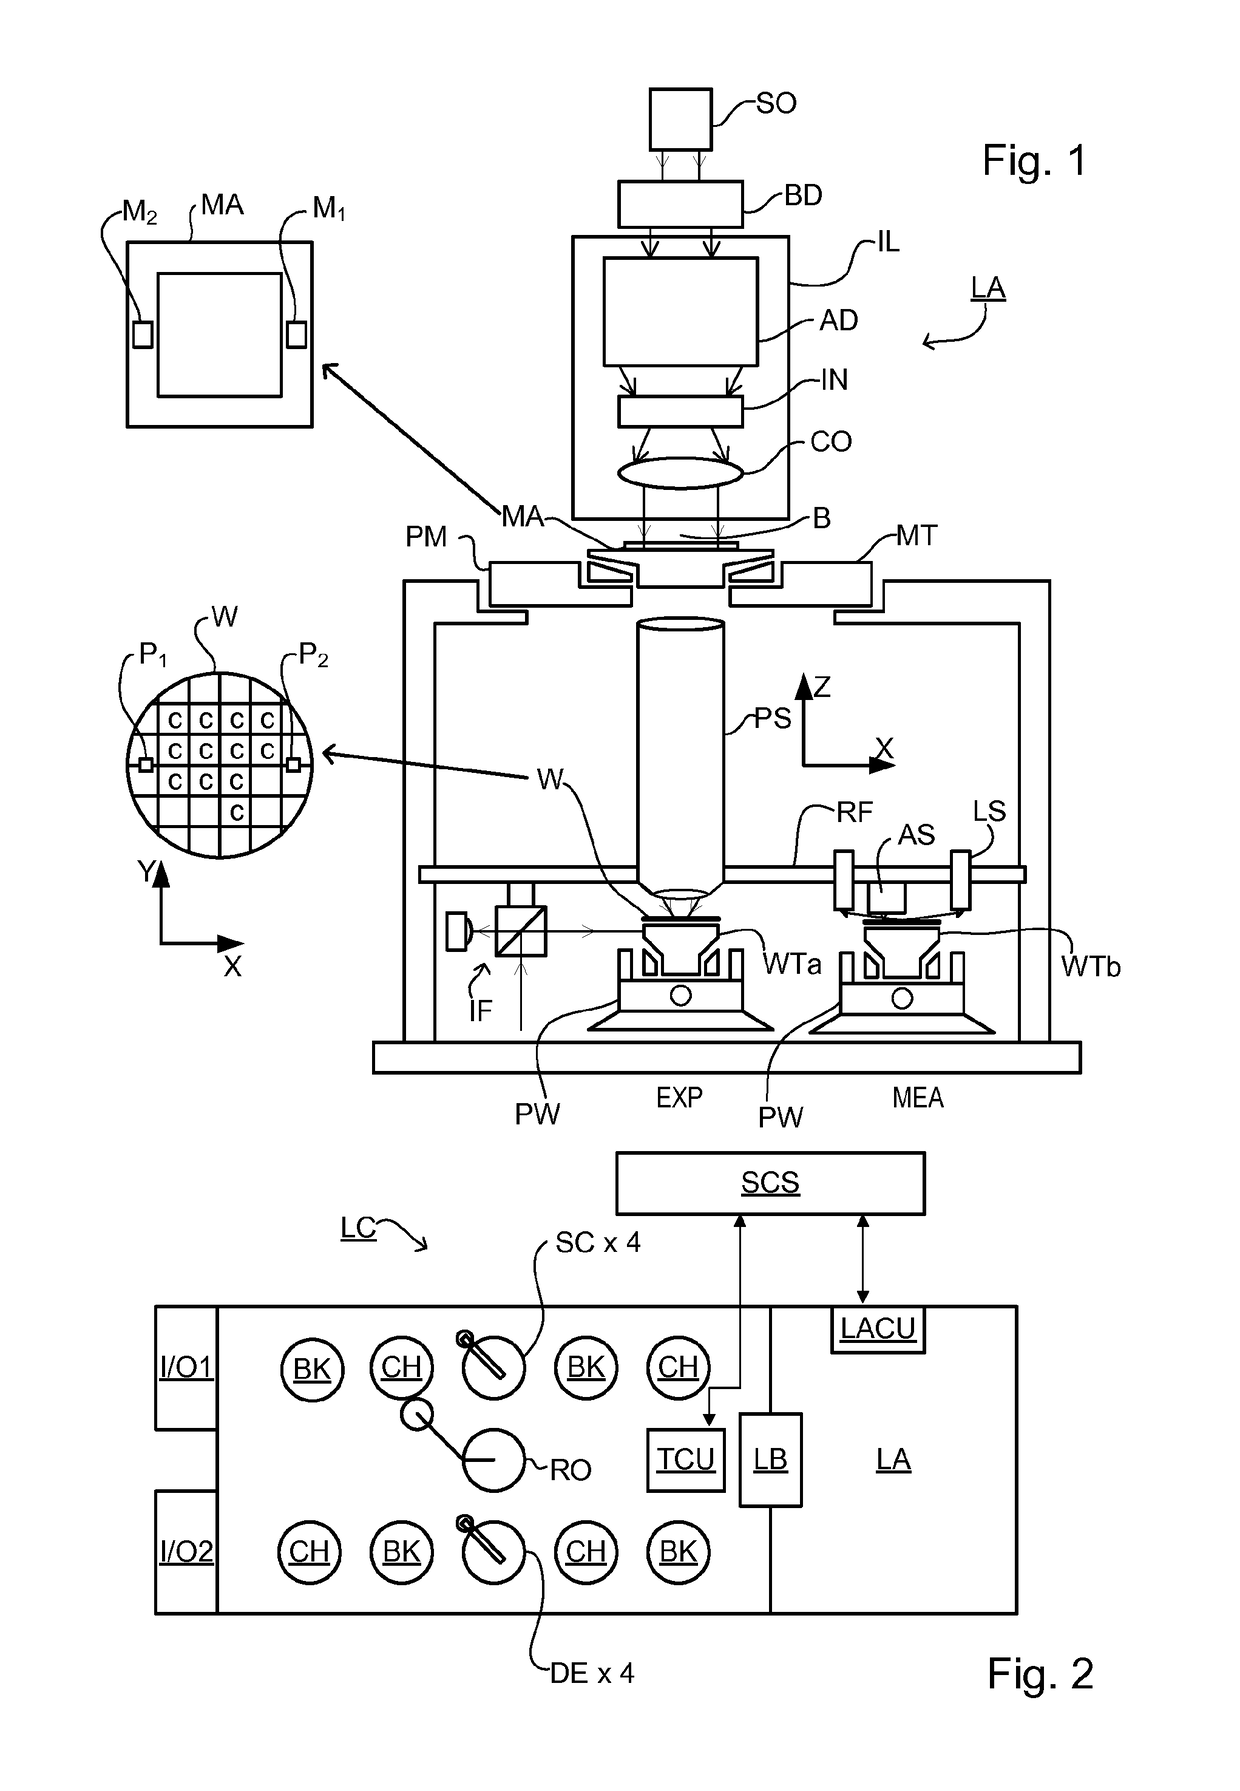 Lithographic apparatus with data processing apparatus